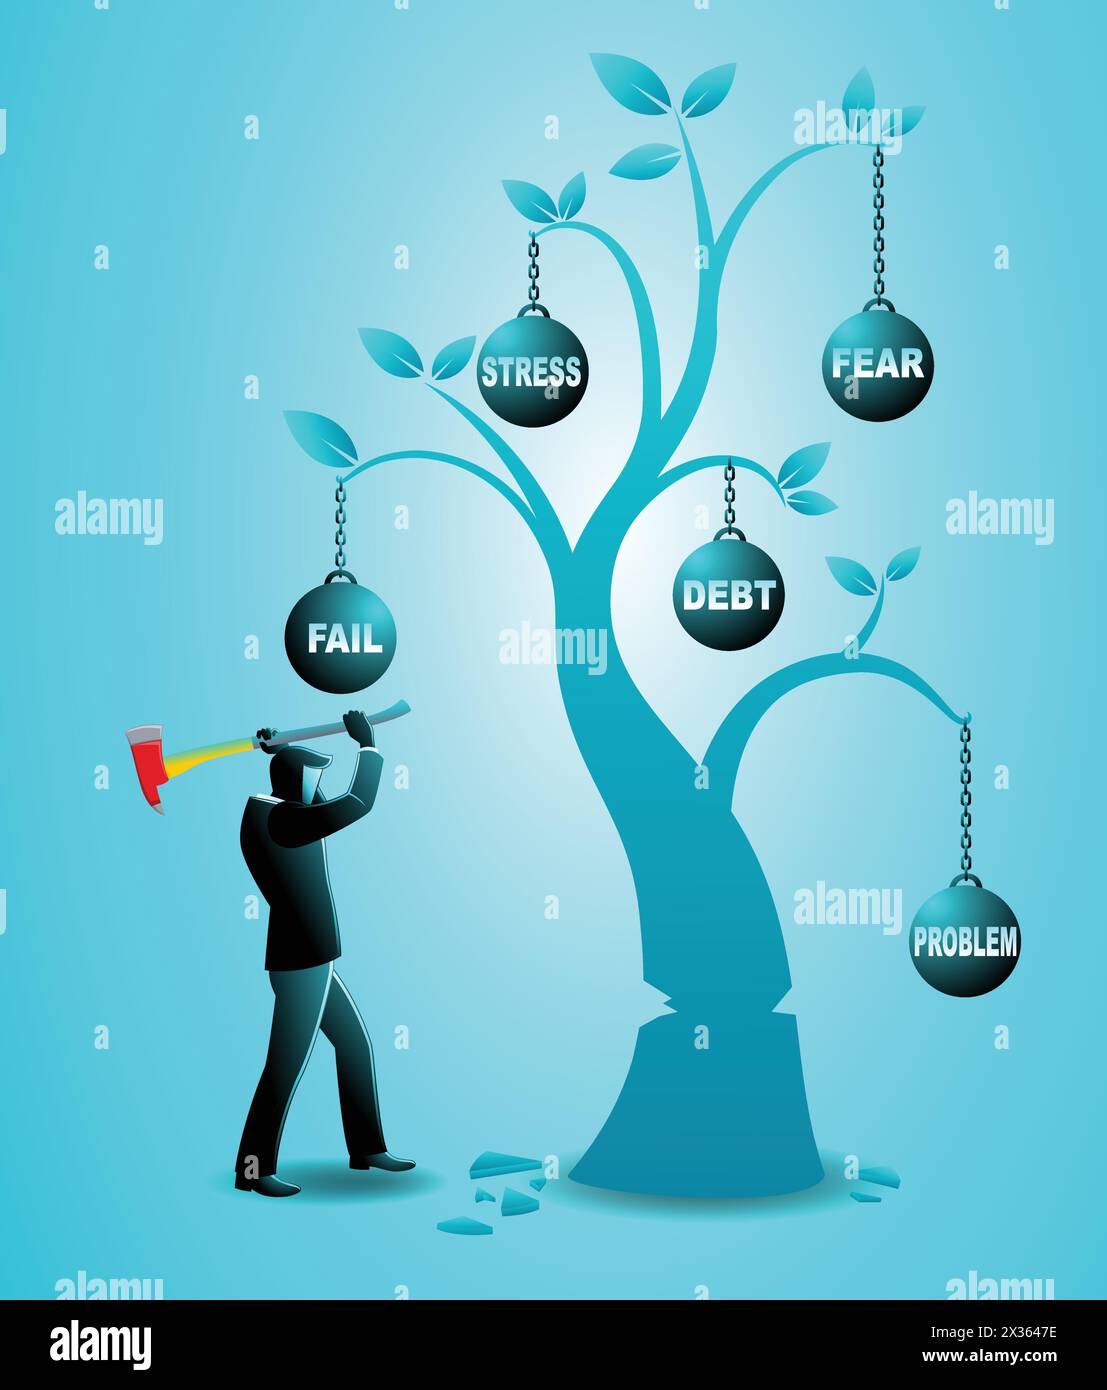 Vector illustration of business concept, businessman chopping down a bad tree with many problems Stock Vector